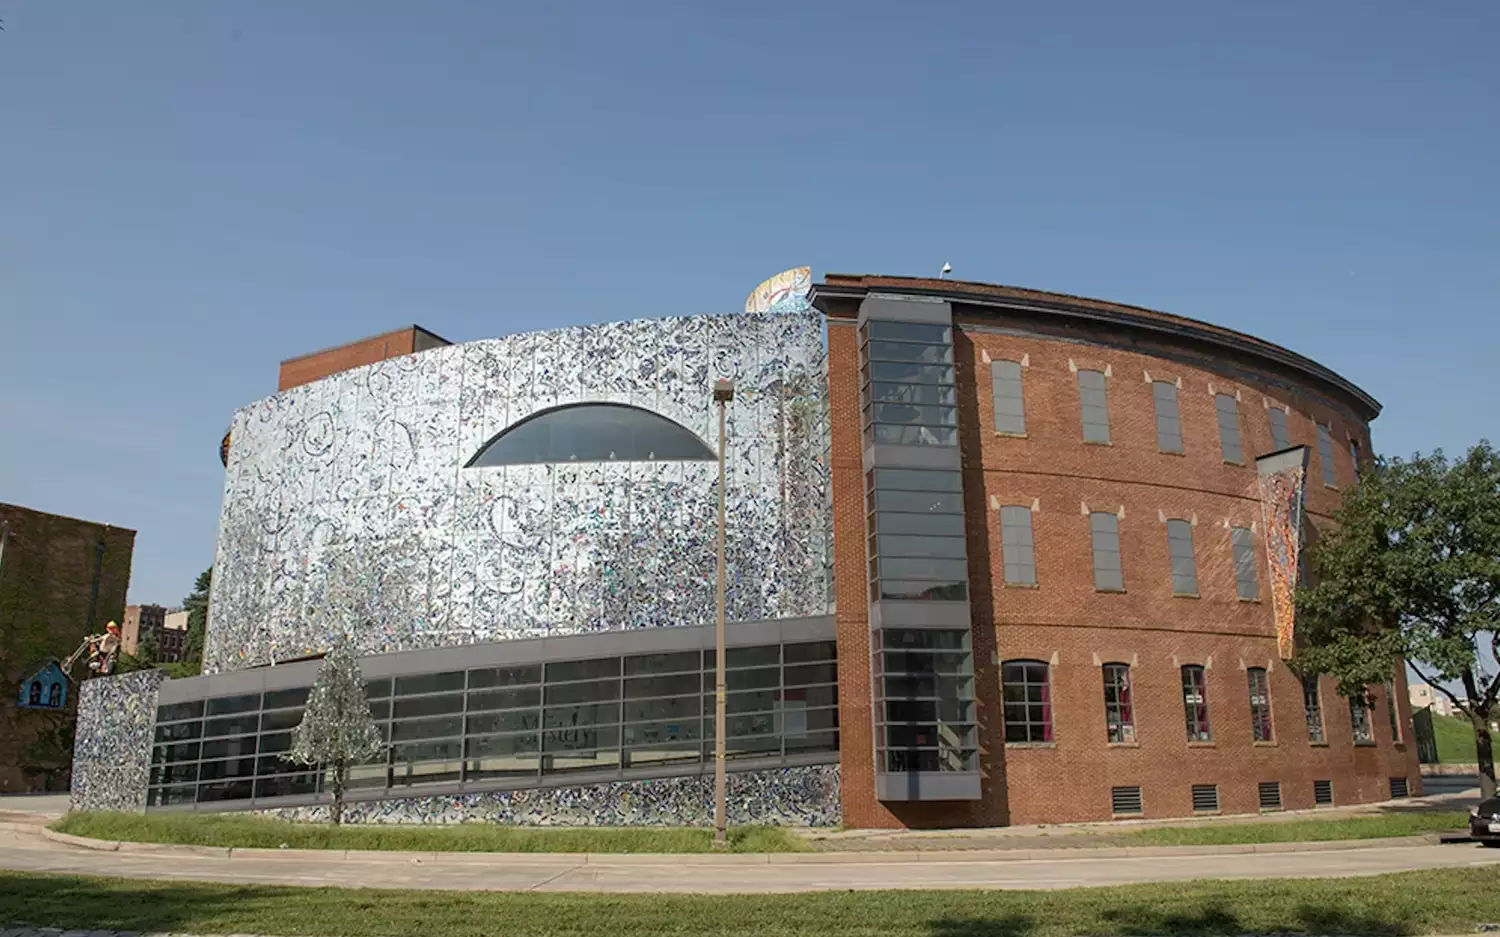 Exterior shot of the American Visionary Art Museum during the day.